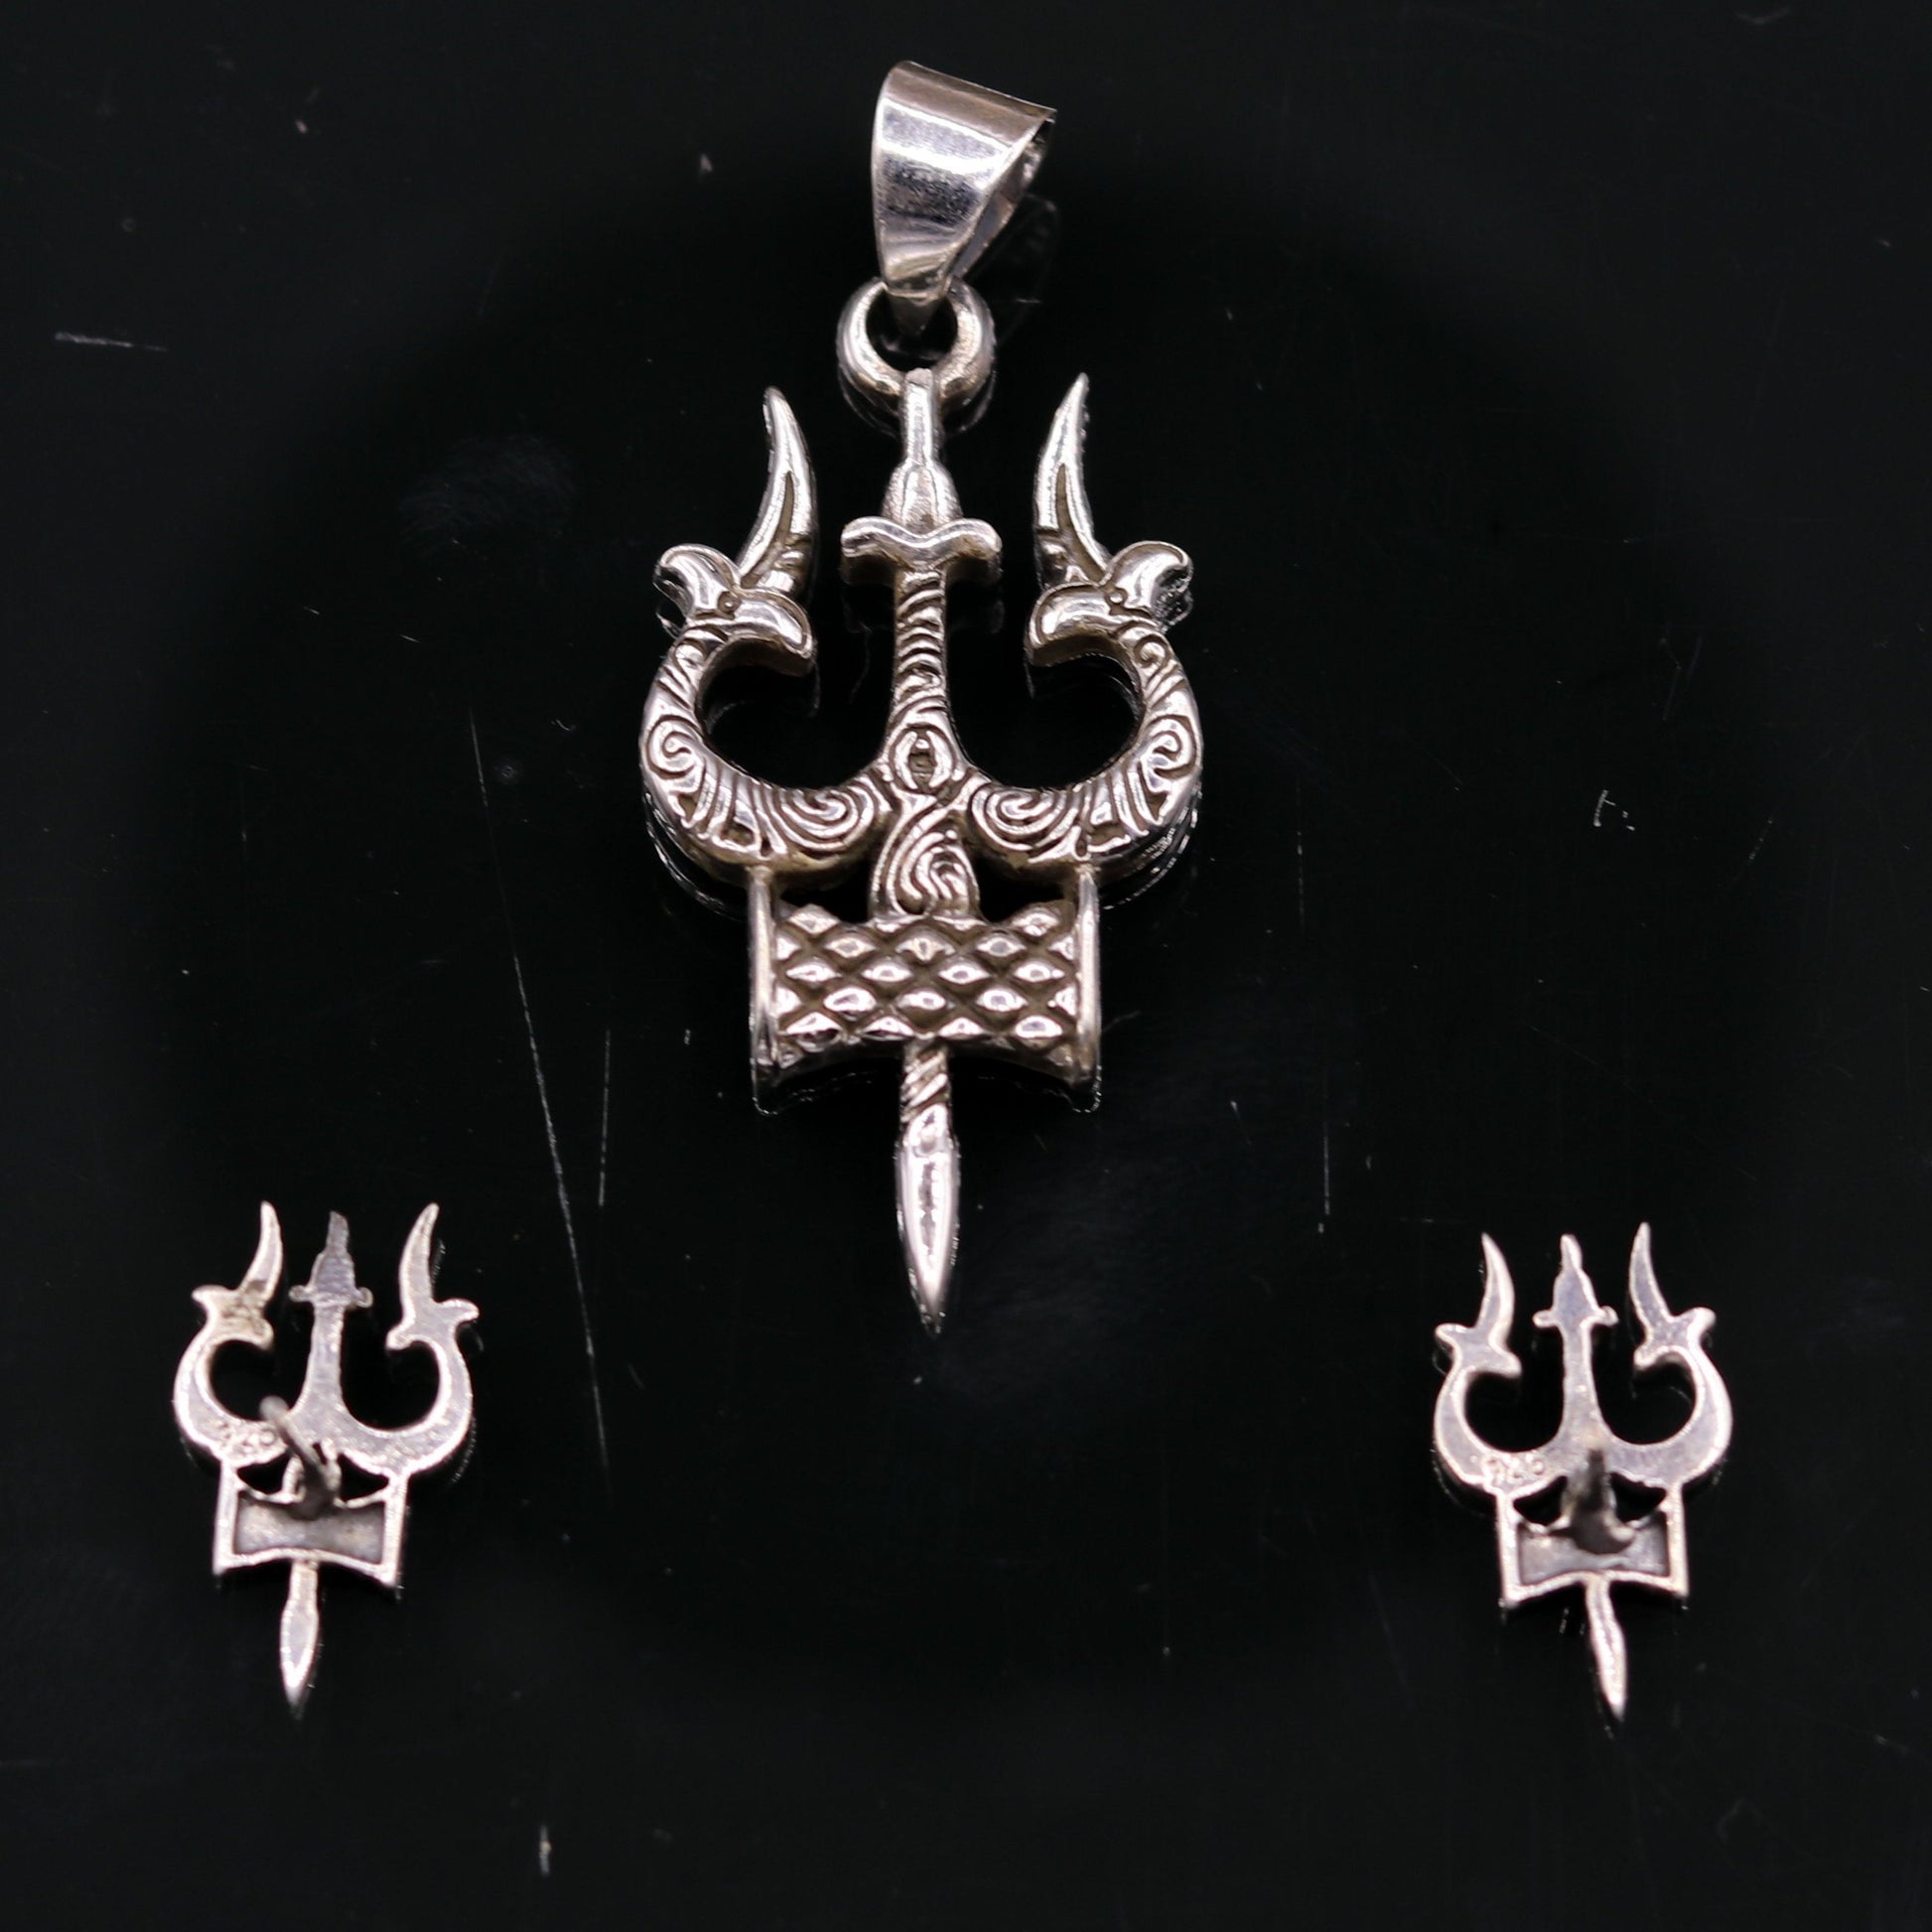 Awesome pretty design Lord Shiva trident shape pendant with tiny trident stud 925 sterling silver amazing fabulous set tribal jewelry nsp231 - TRIBAL ORNAMENTS